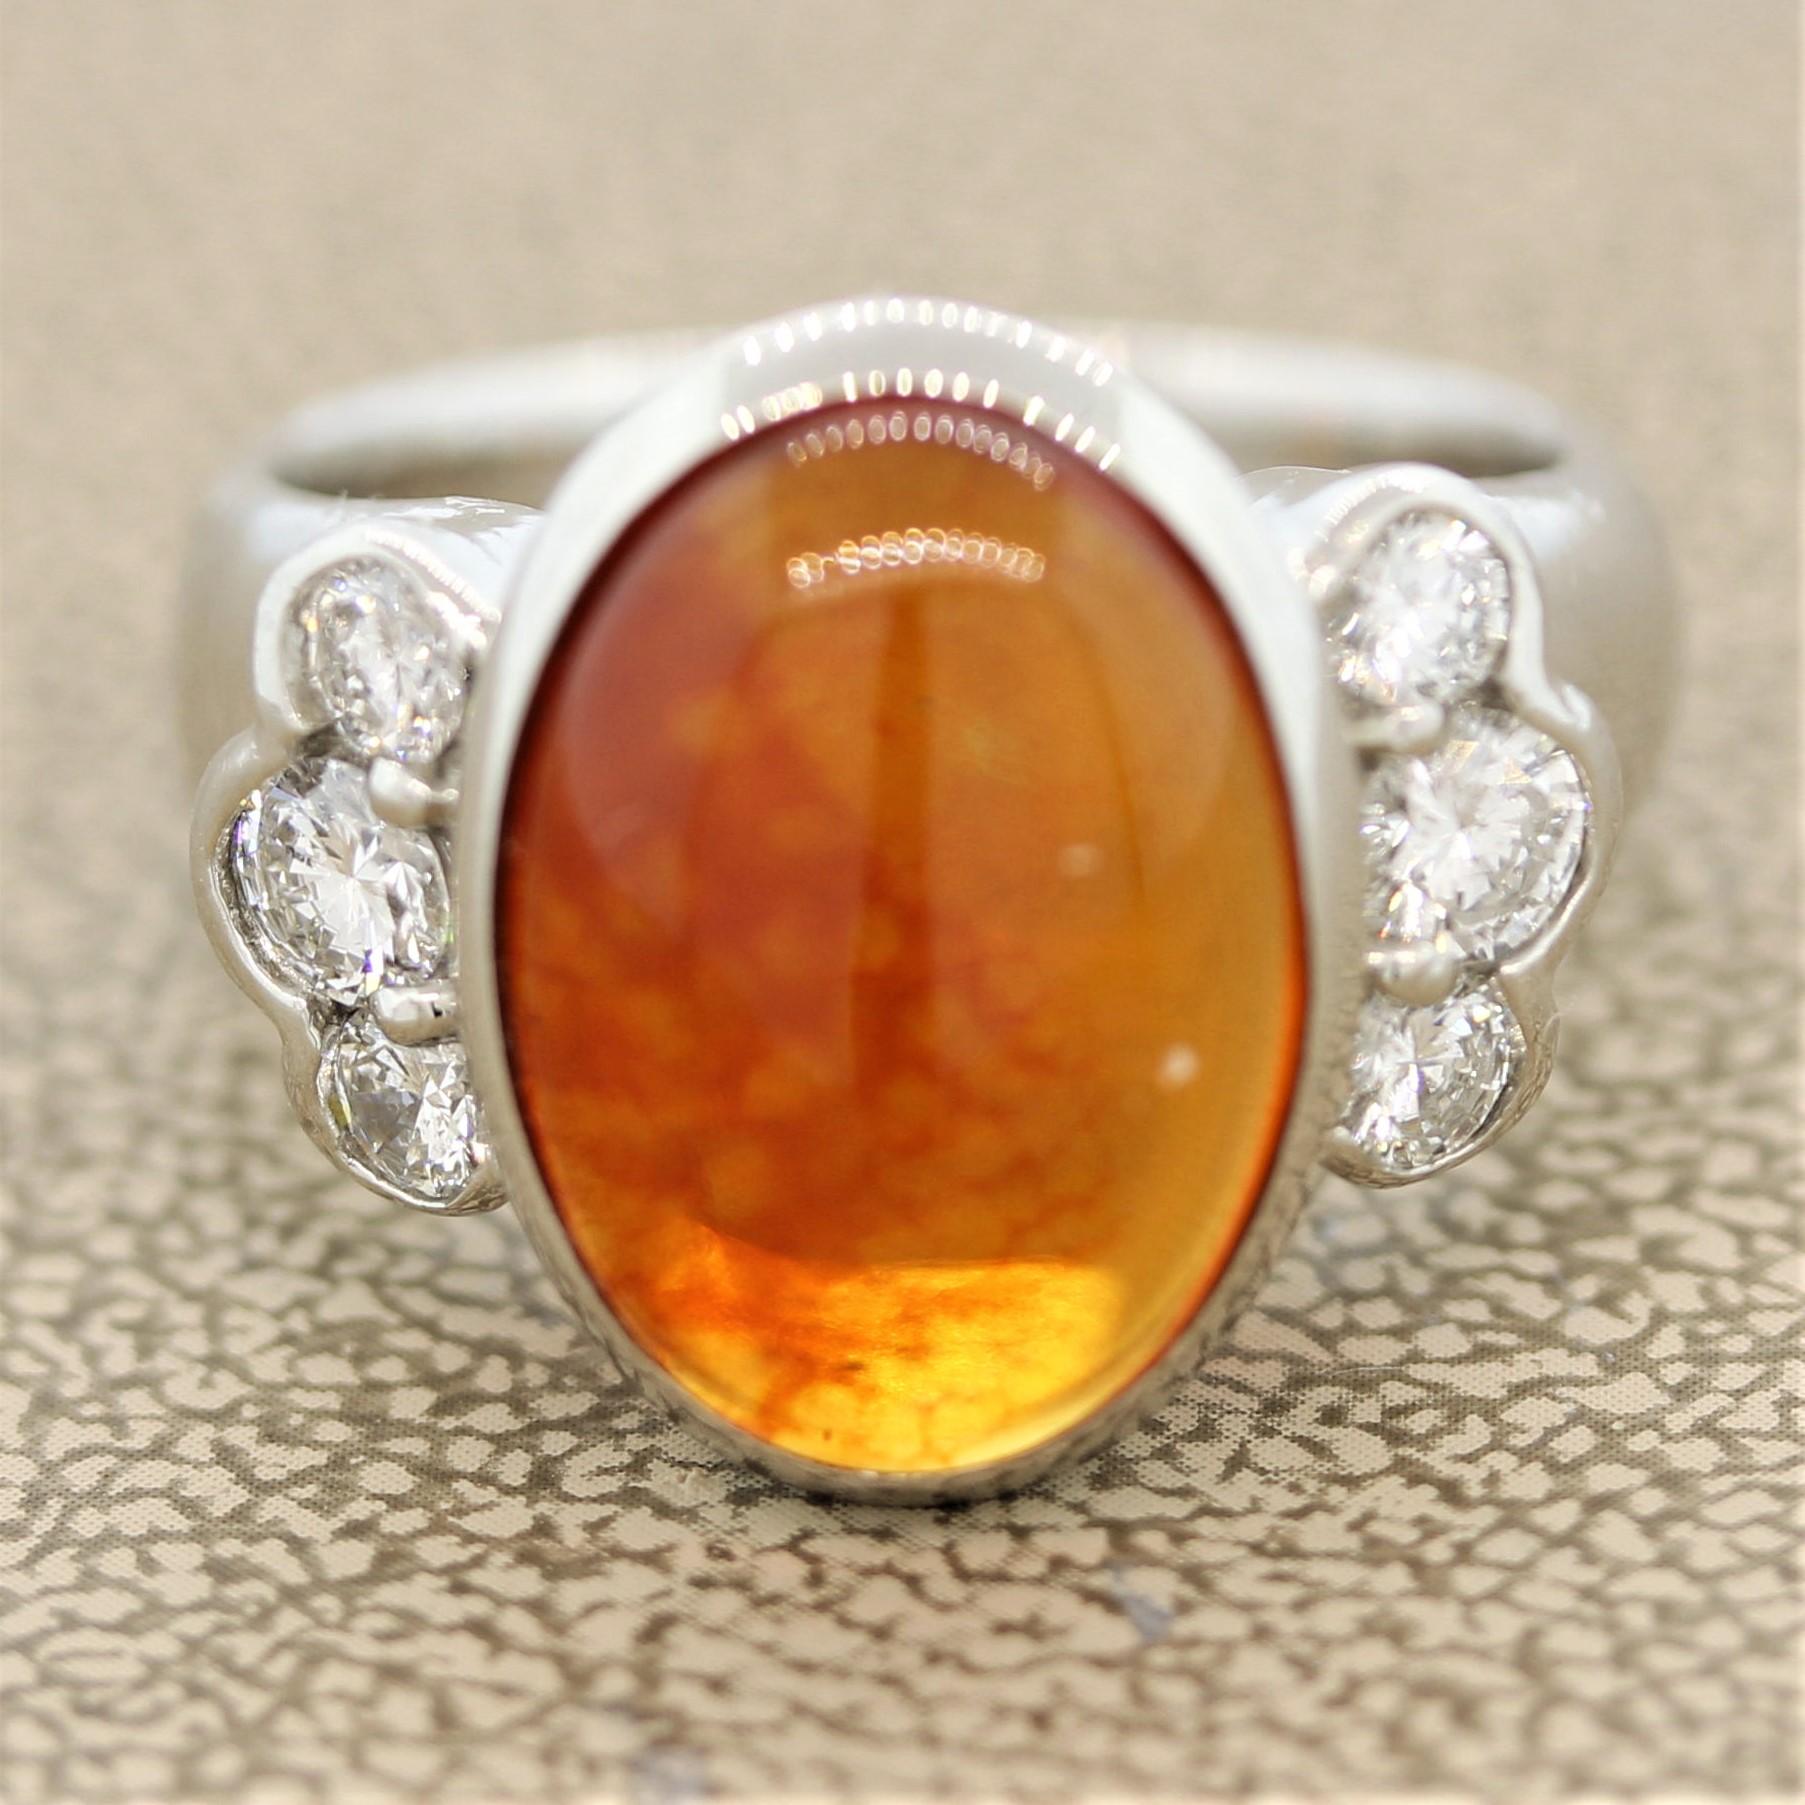 A deep royal jelly colored Mexican fire opal! It weighs 15.3 carats with a juicy orange color and shows play of color with light flashes of green and blue. It is accented by 6 round brilliant cut diamonds set in the sides of the opal and weigh a